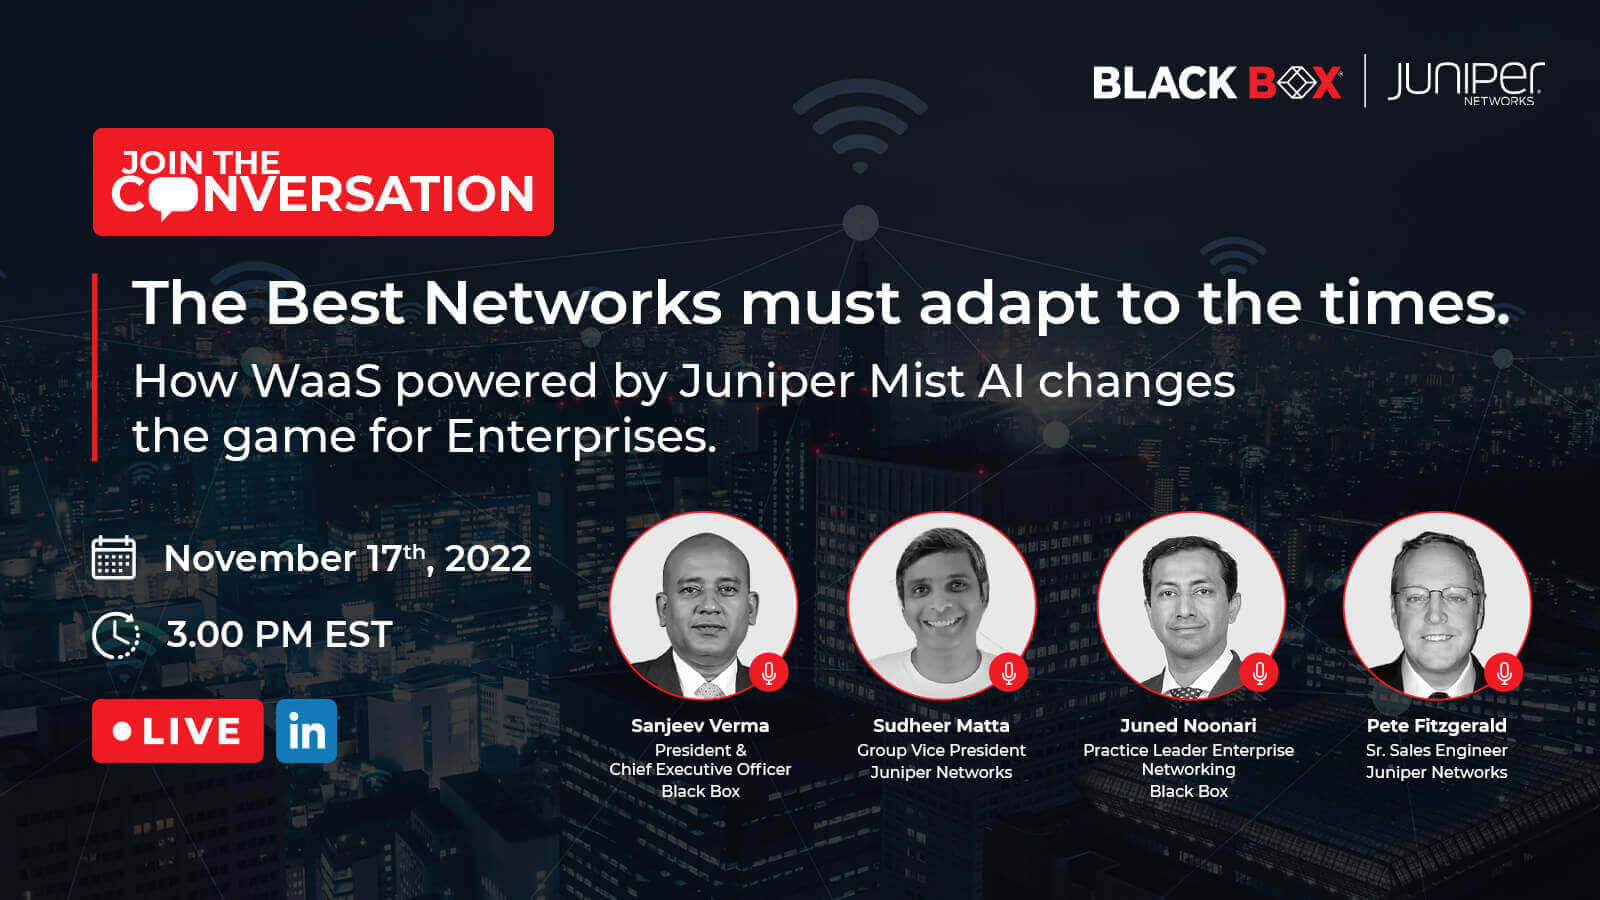 The Best Networks must adapt to the times - Black Box & Juniper Networks Live Session